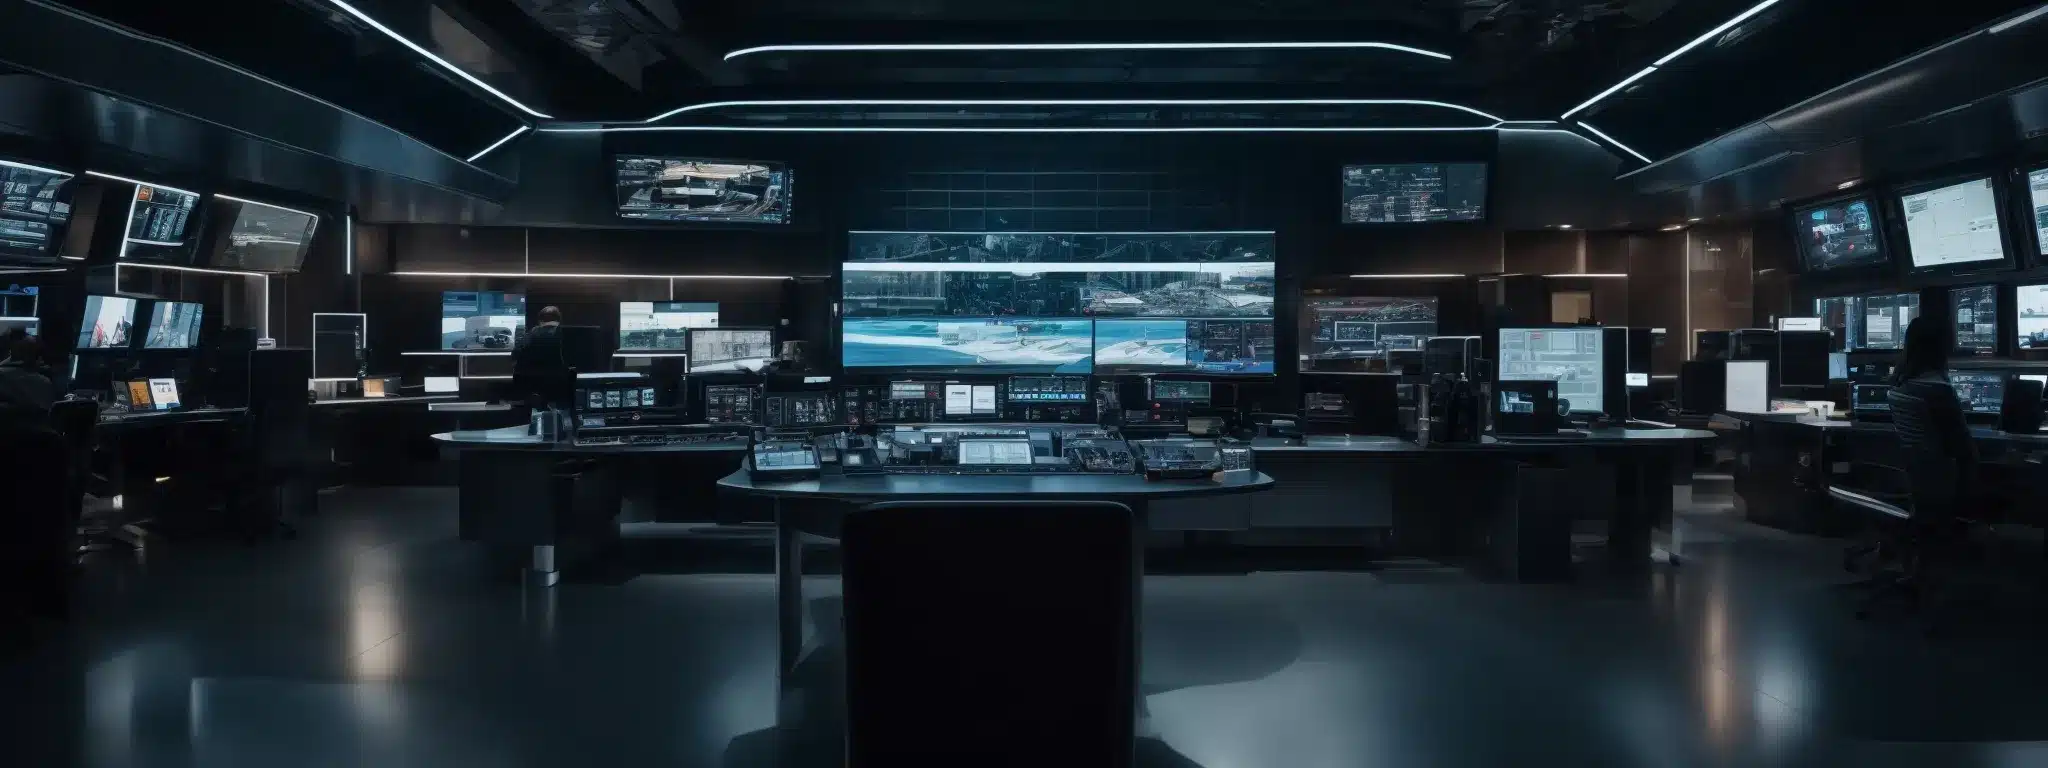 A Futuristic Command Center With An Expansive Digital Screen Displaying An Array Of Content Management Tools.